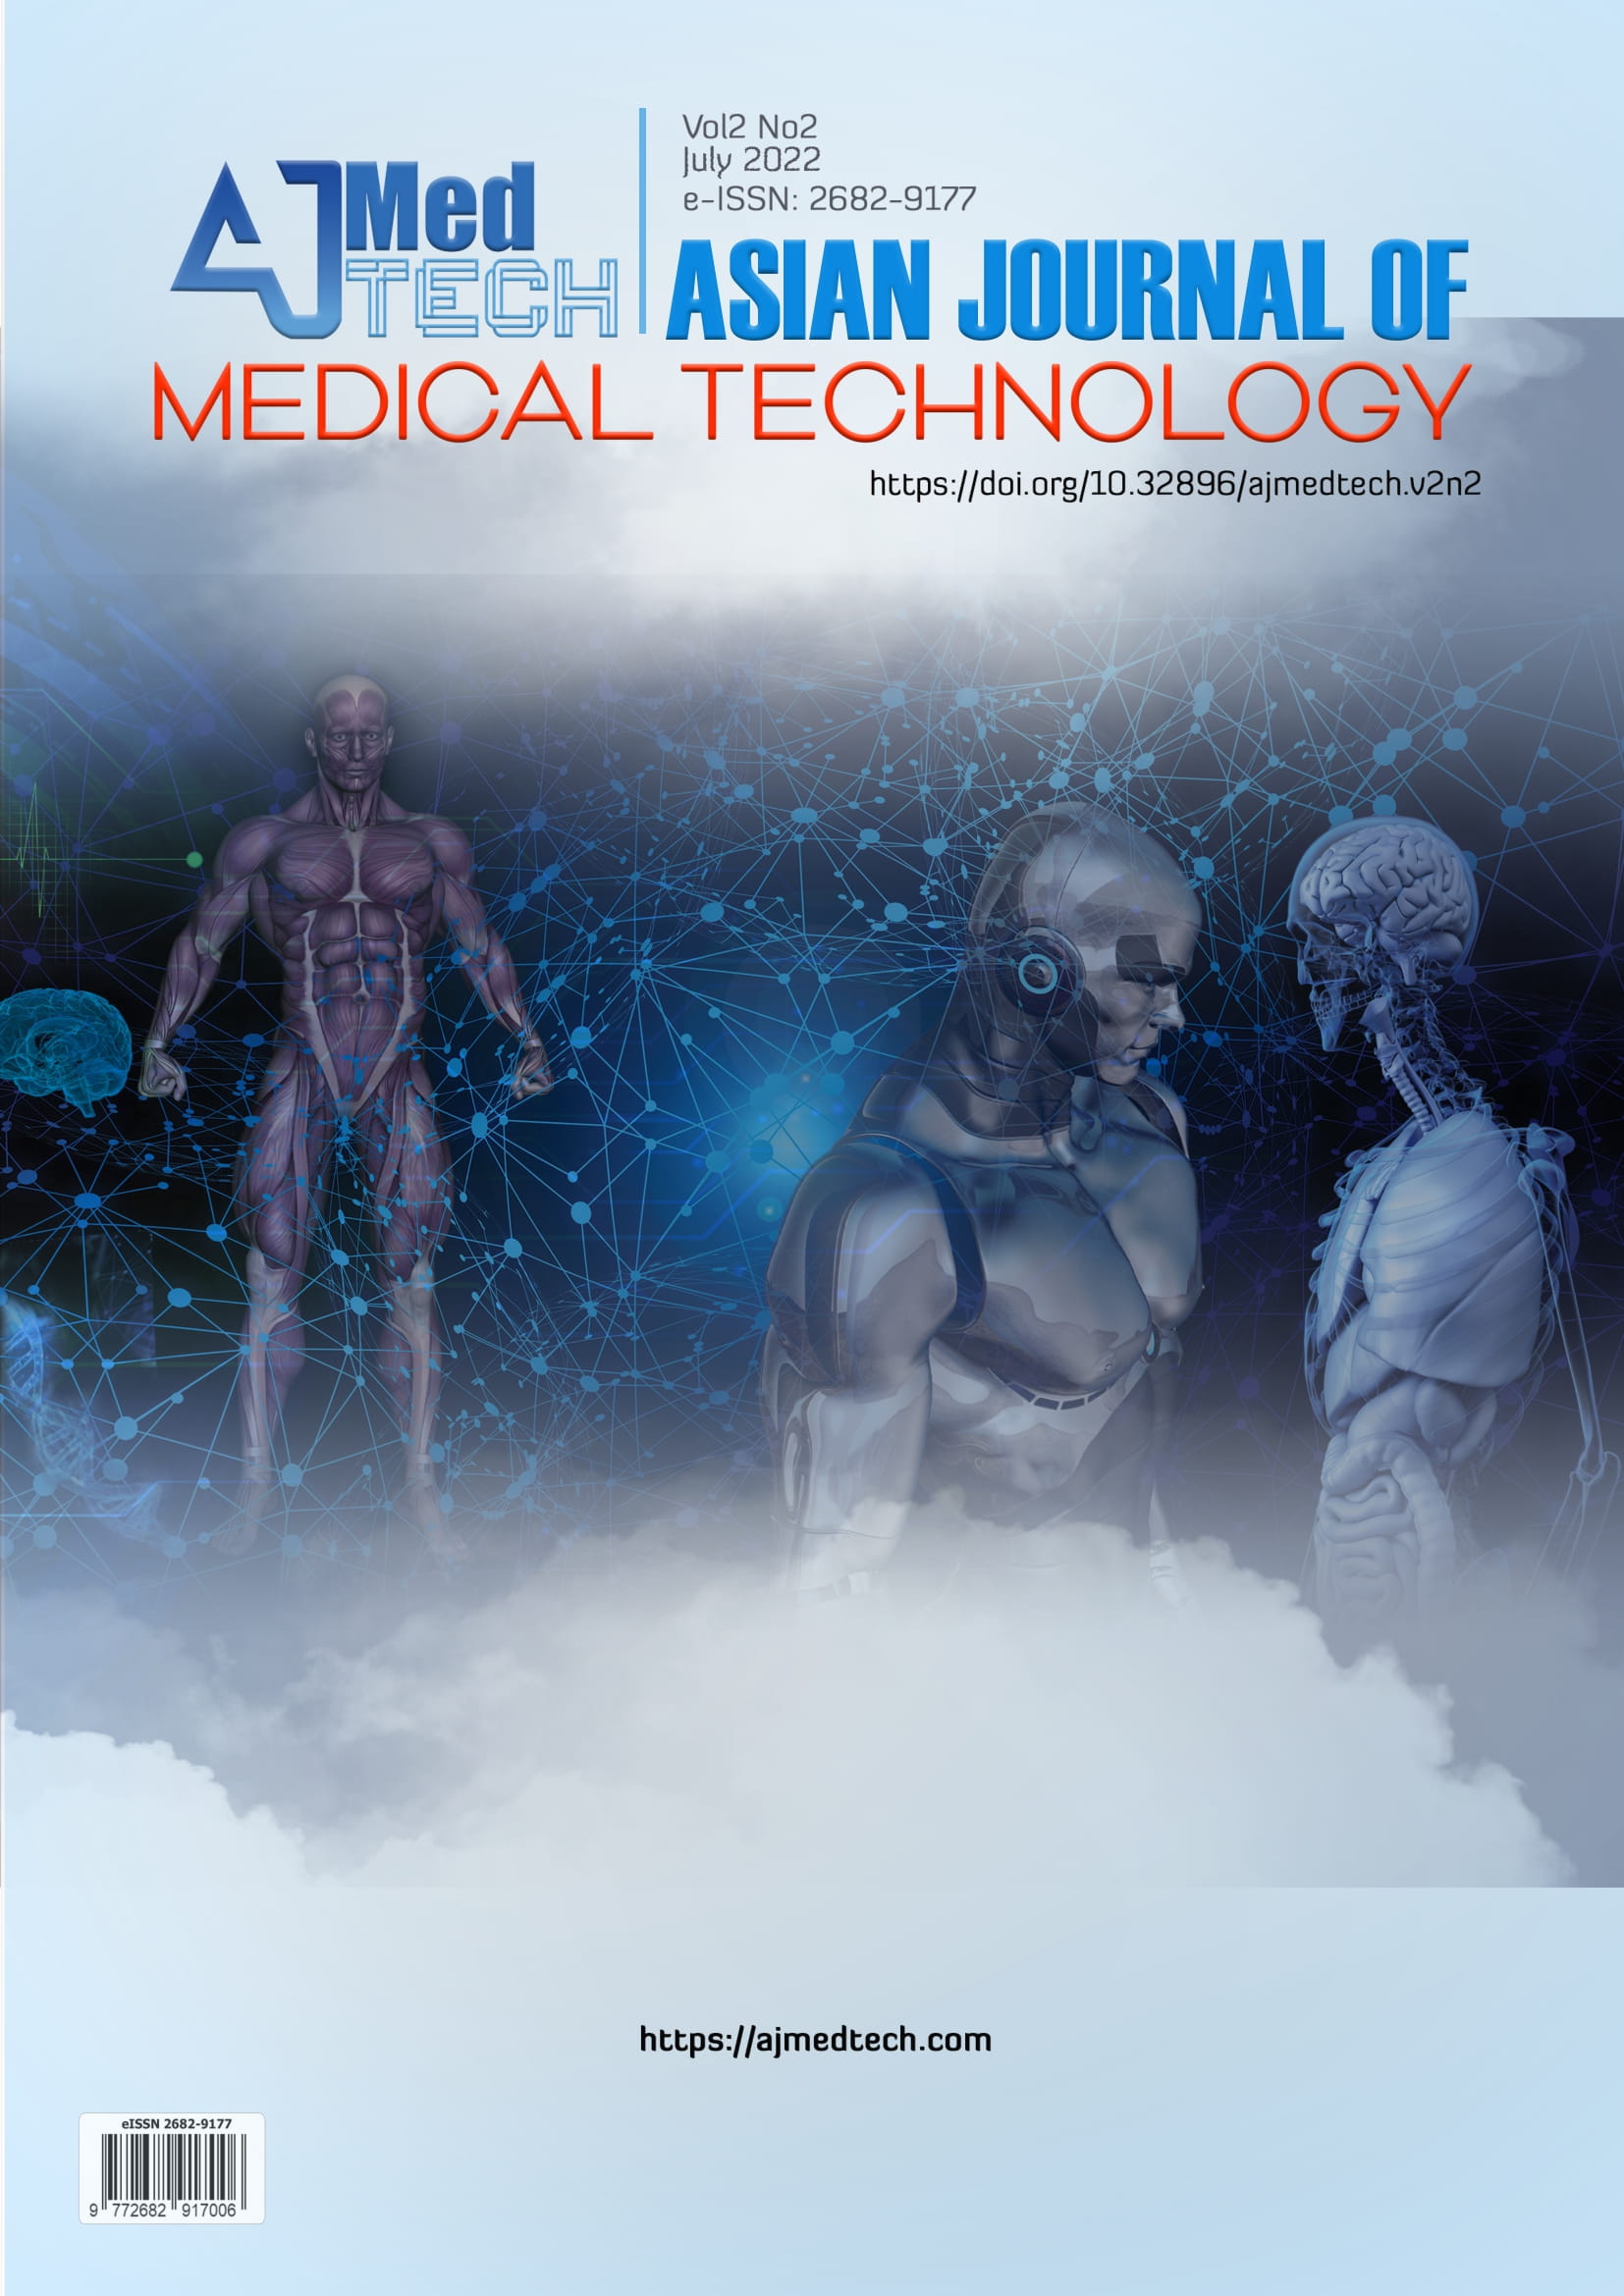 					View Vol. 2 No. 2 (2022): Vol. 2 No. 2 (2022): Asian journal of medical technology
				